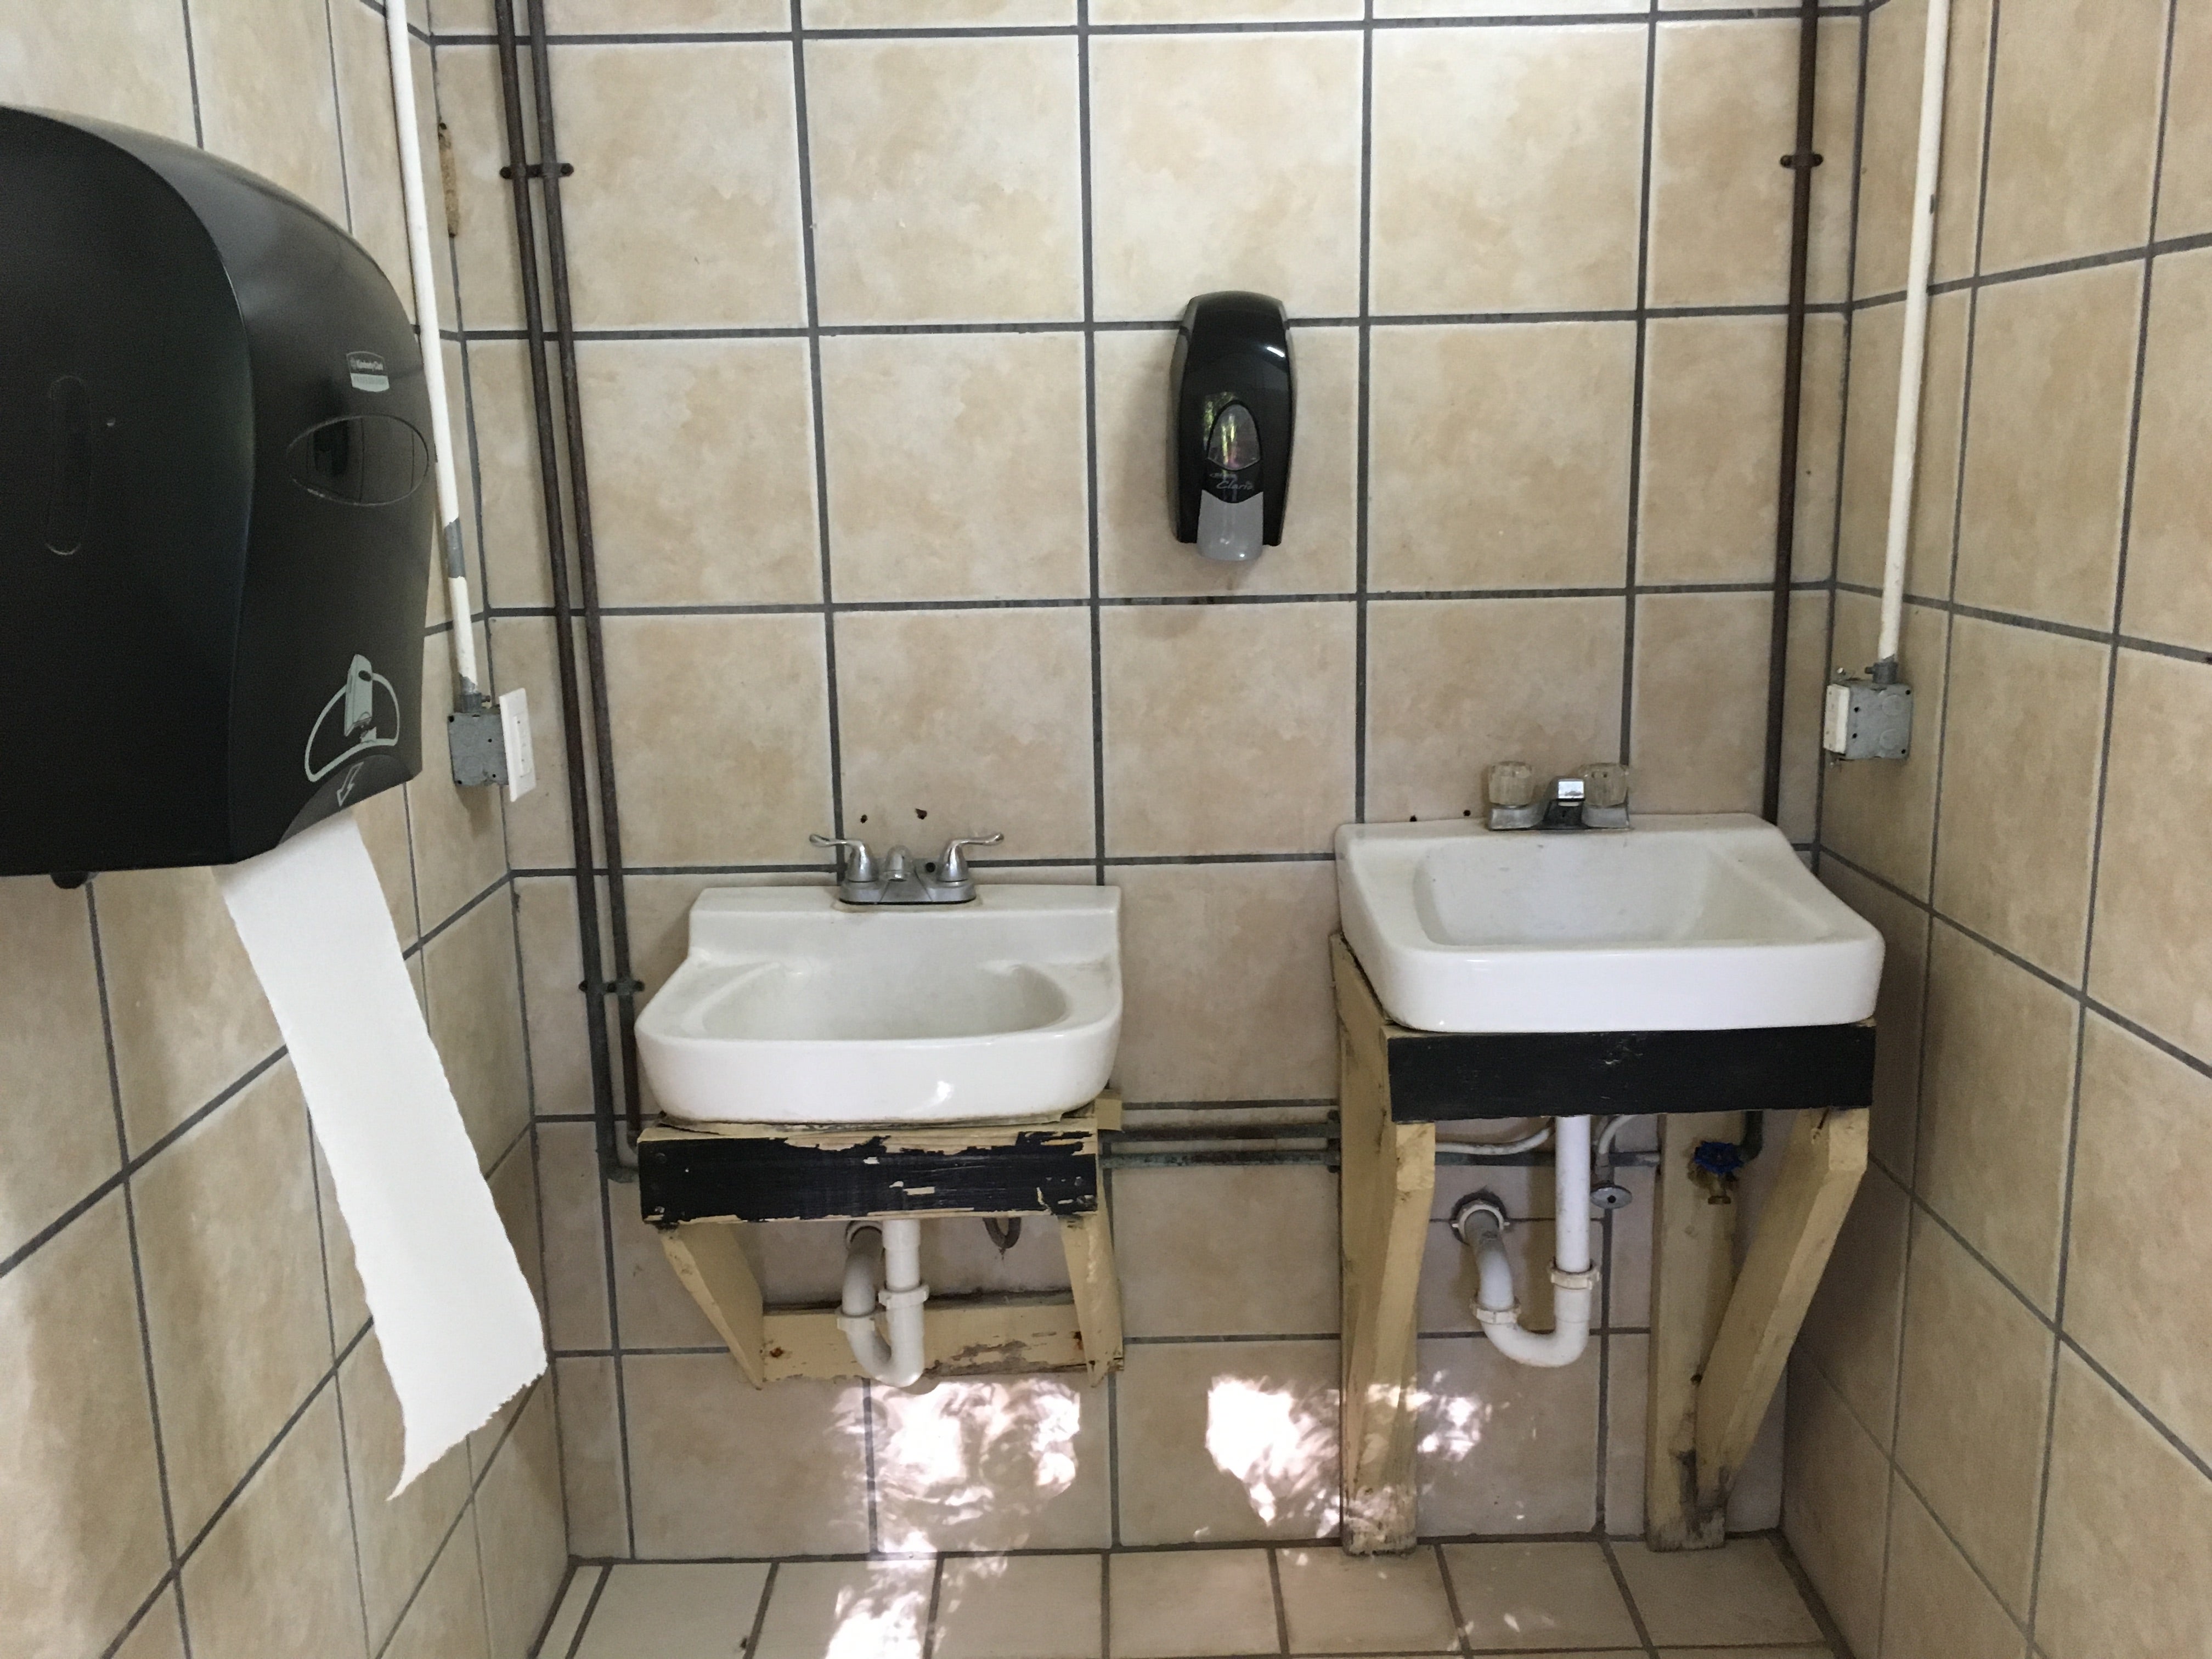 Restrooms with sinks